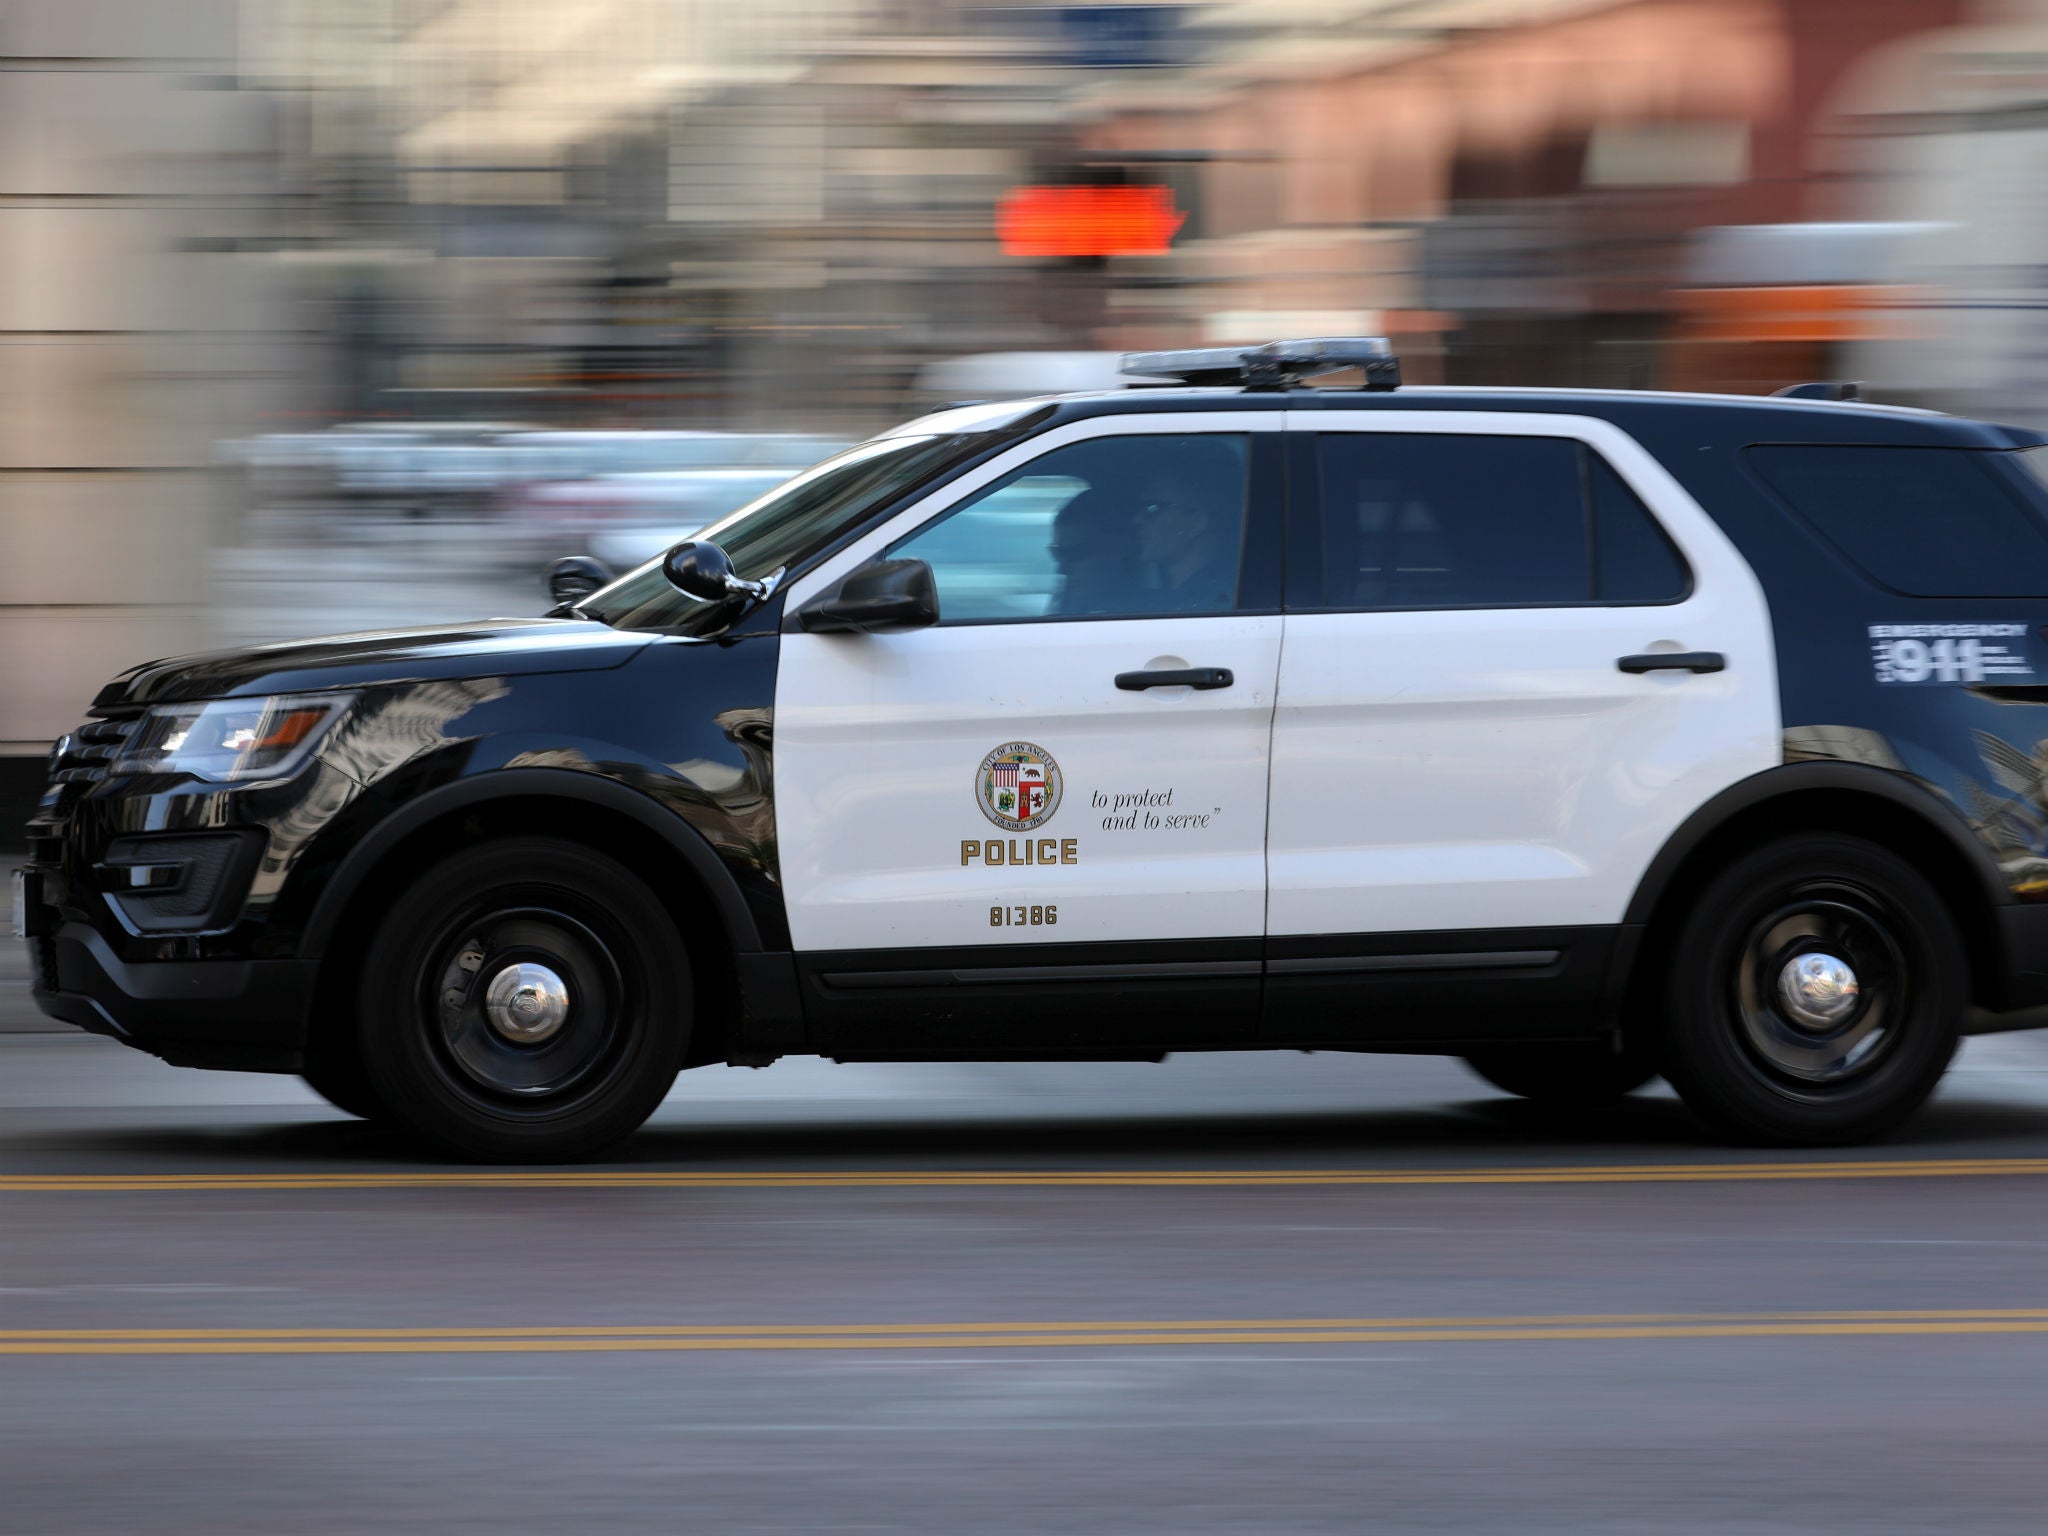 Two Los Angeles police officers were accused of sexually assaulting multiple women